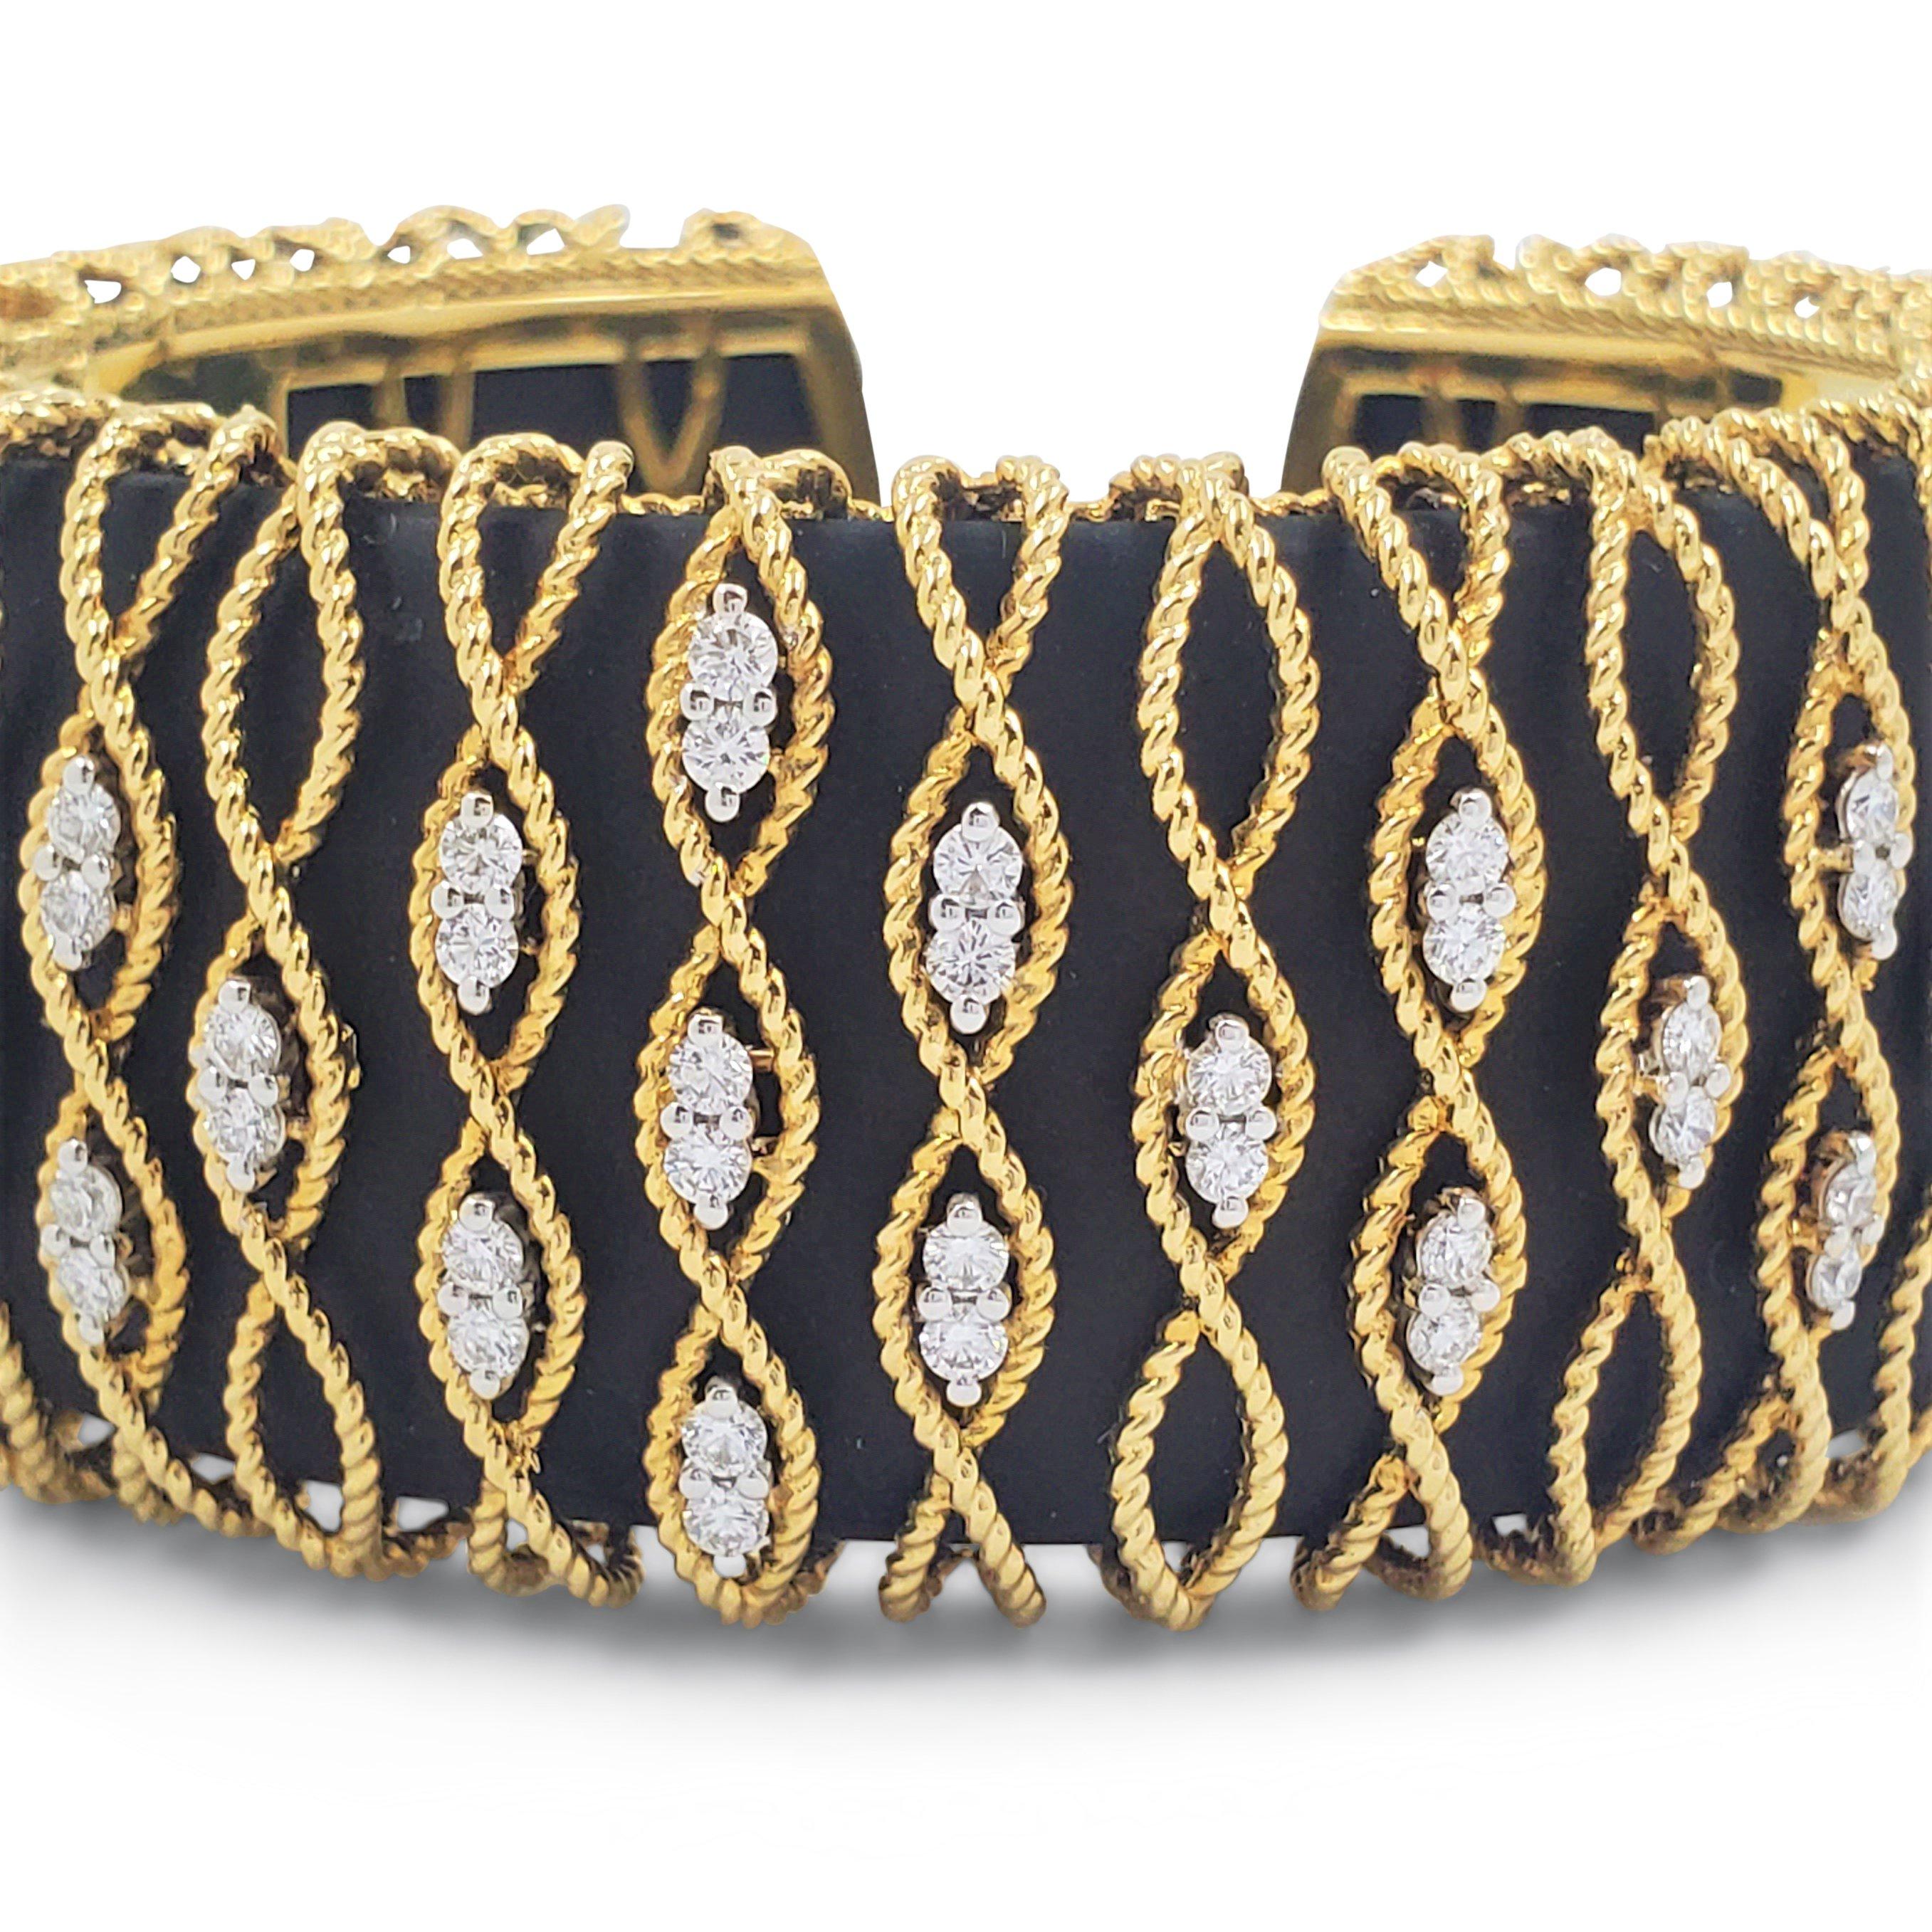 Authentic Roberto Coin cuff bracelet composed of dark wood delicately enclosed in a mesh of 18 karat yellow gold strings. 46 beautiful sparkling round brilliant cut diamonds (G-H color, S-I clarity) weighing an estimated .90 carats enhance the set